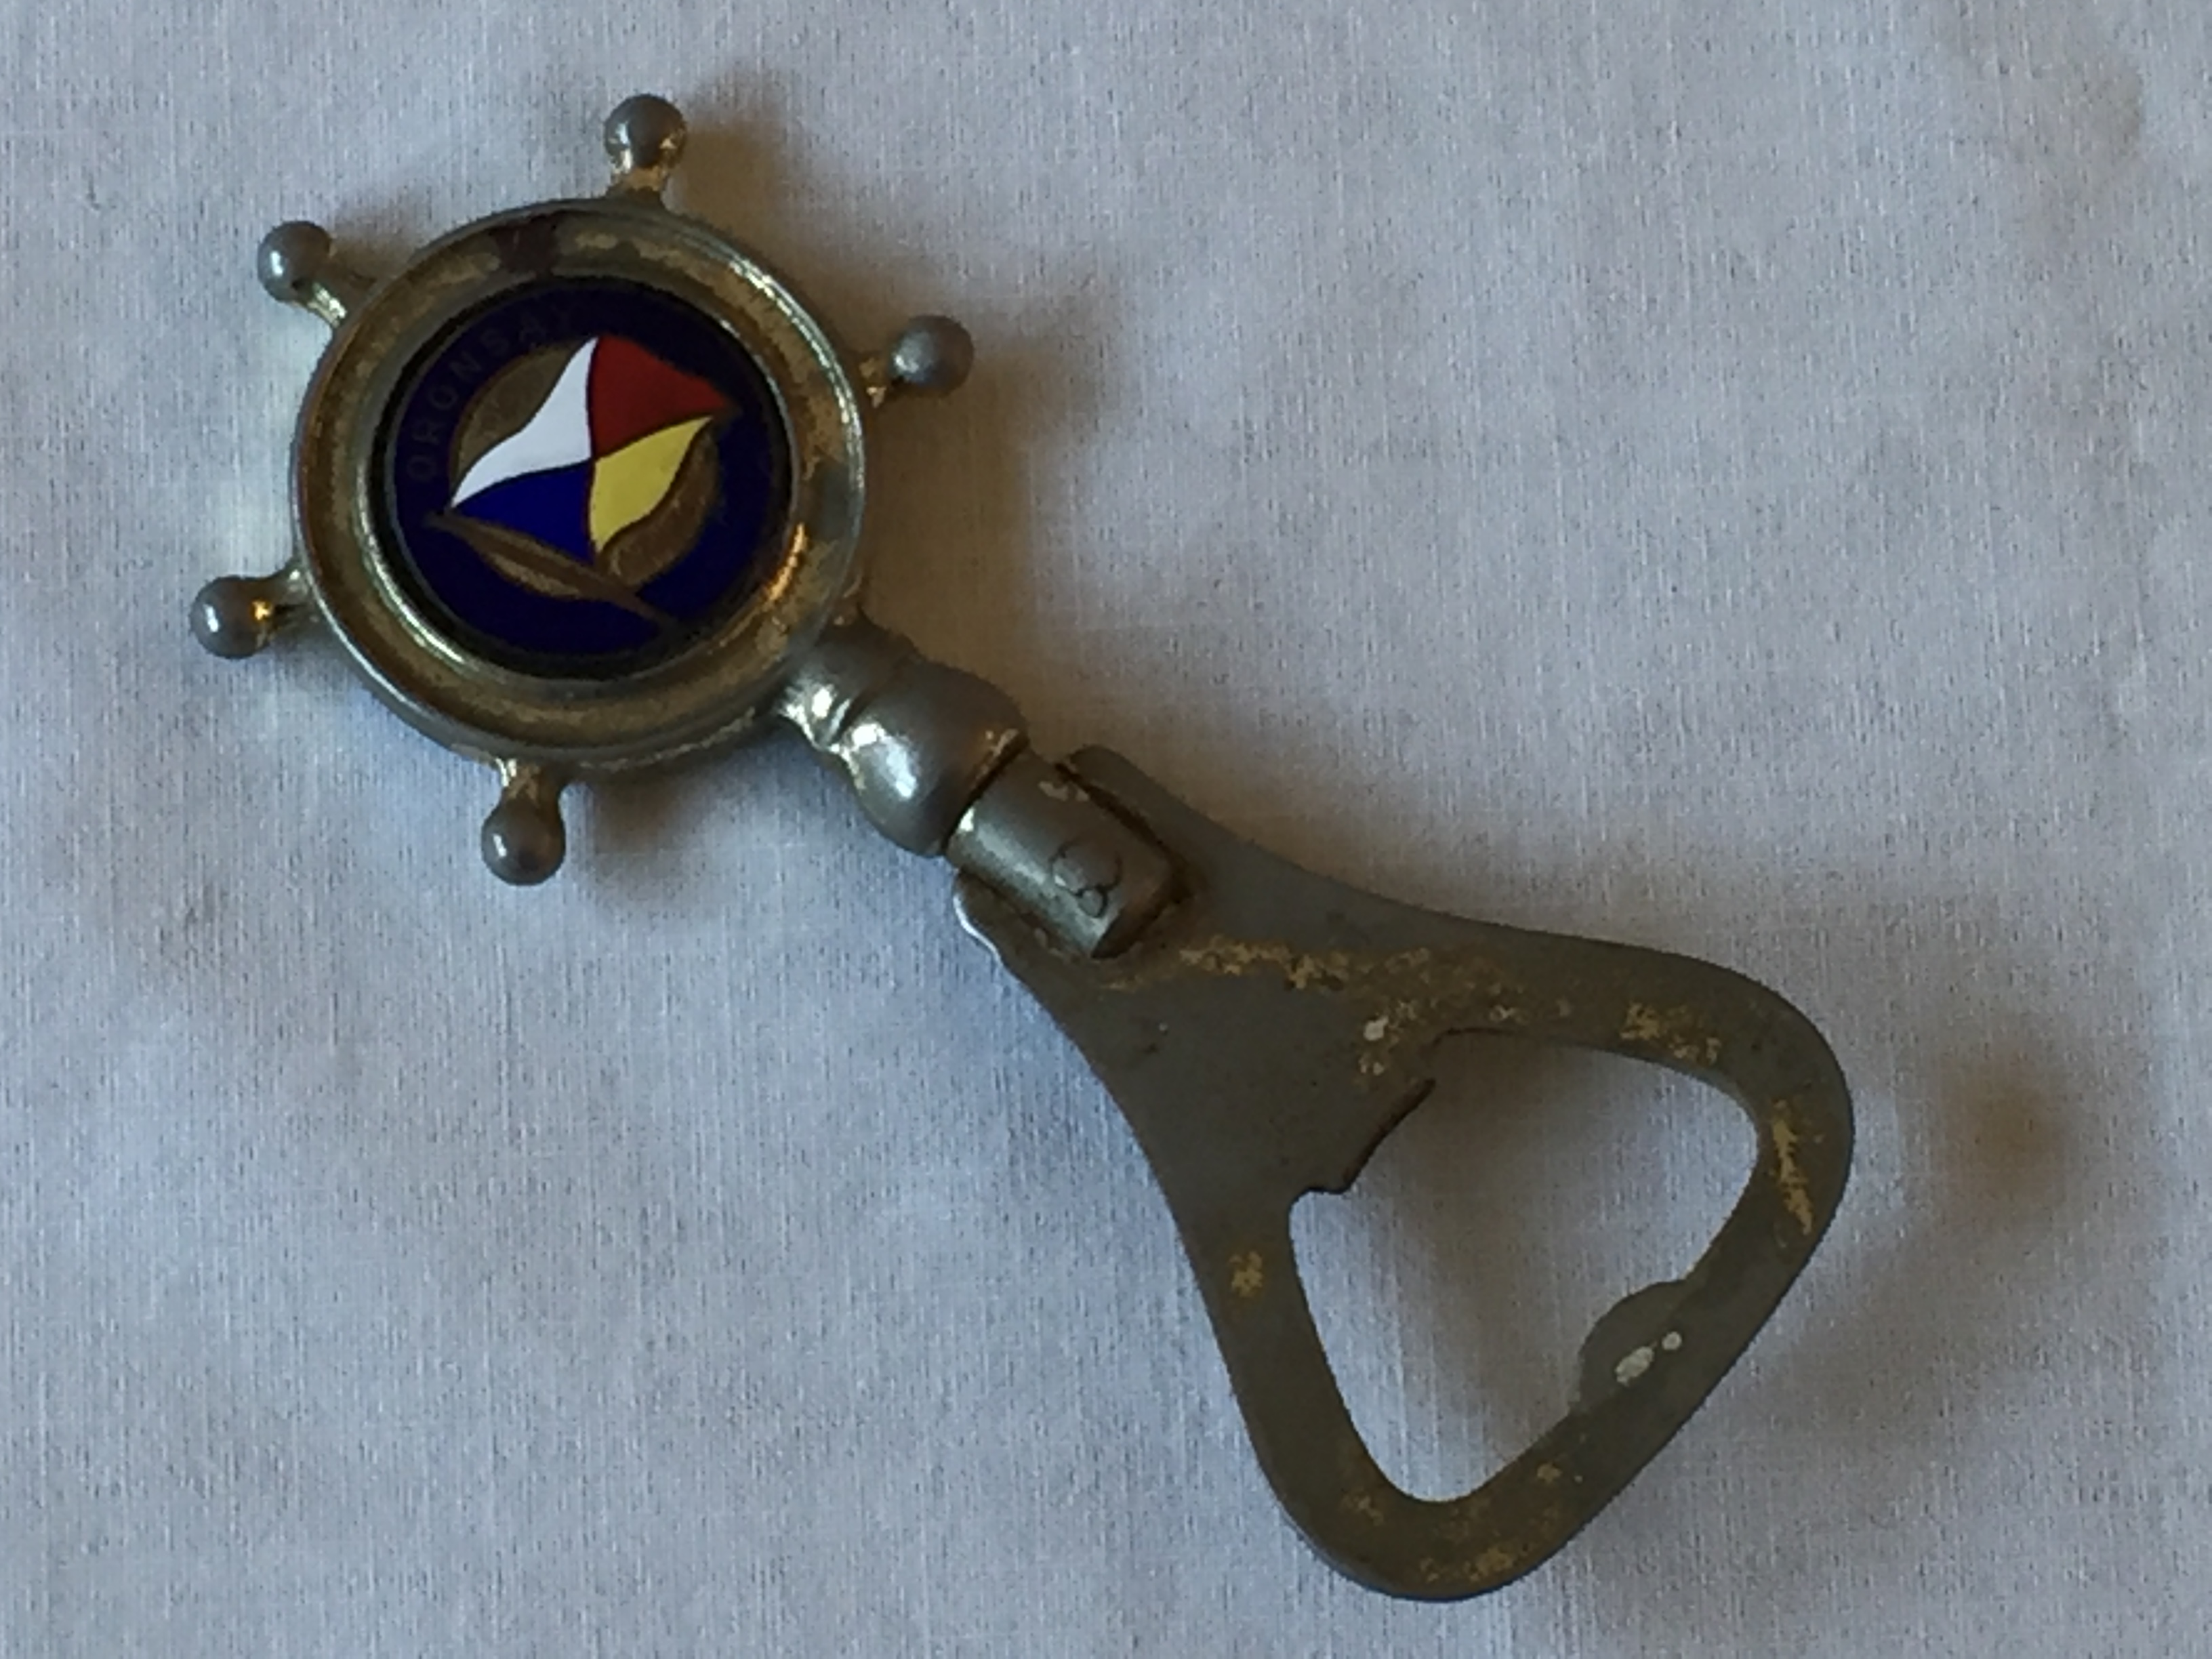 BOTTLE OPENER FROM THE VESSEL THE SS ORONSAY